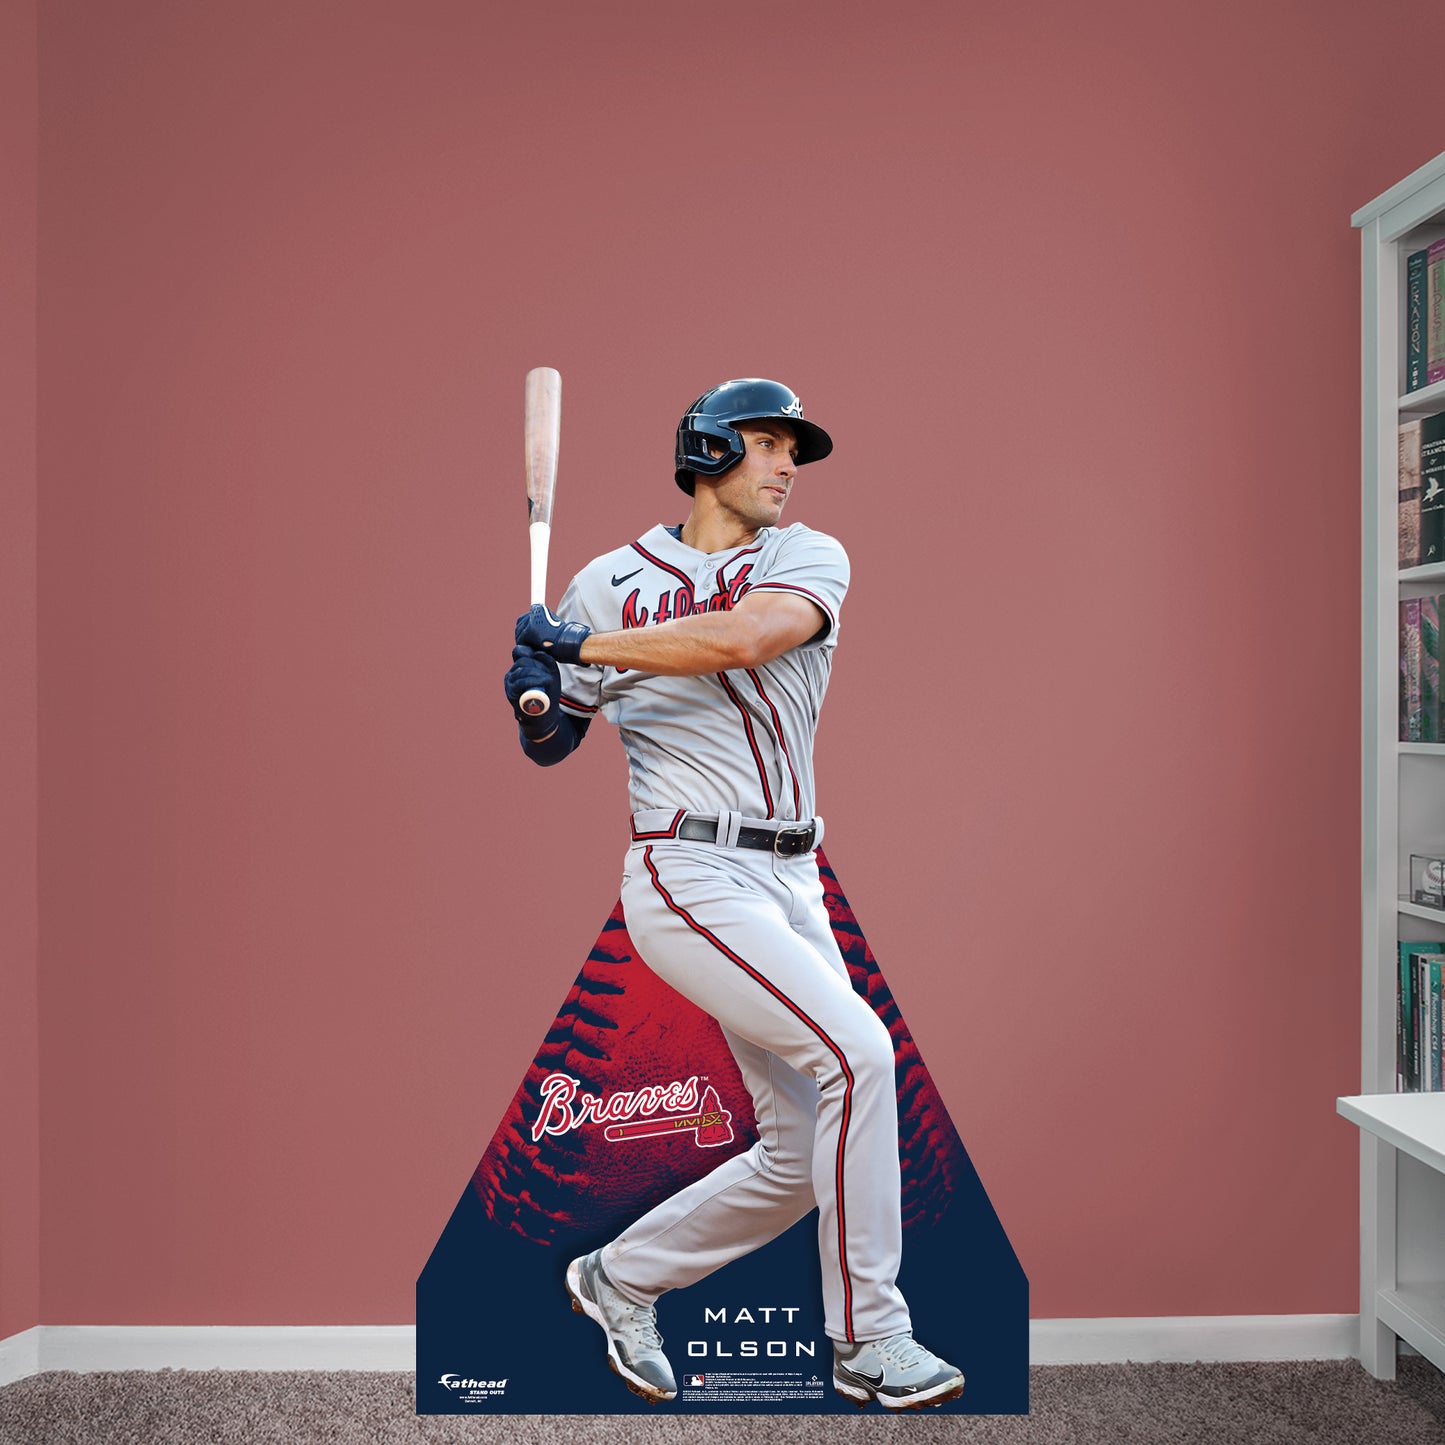 Atlanta Braves: Matt Olson Life-Size Foam Core Cutout - Officially Licensed MLB Stand Out